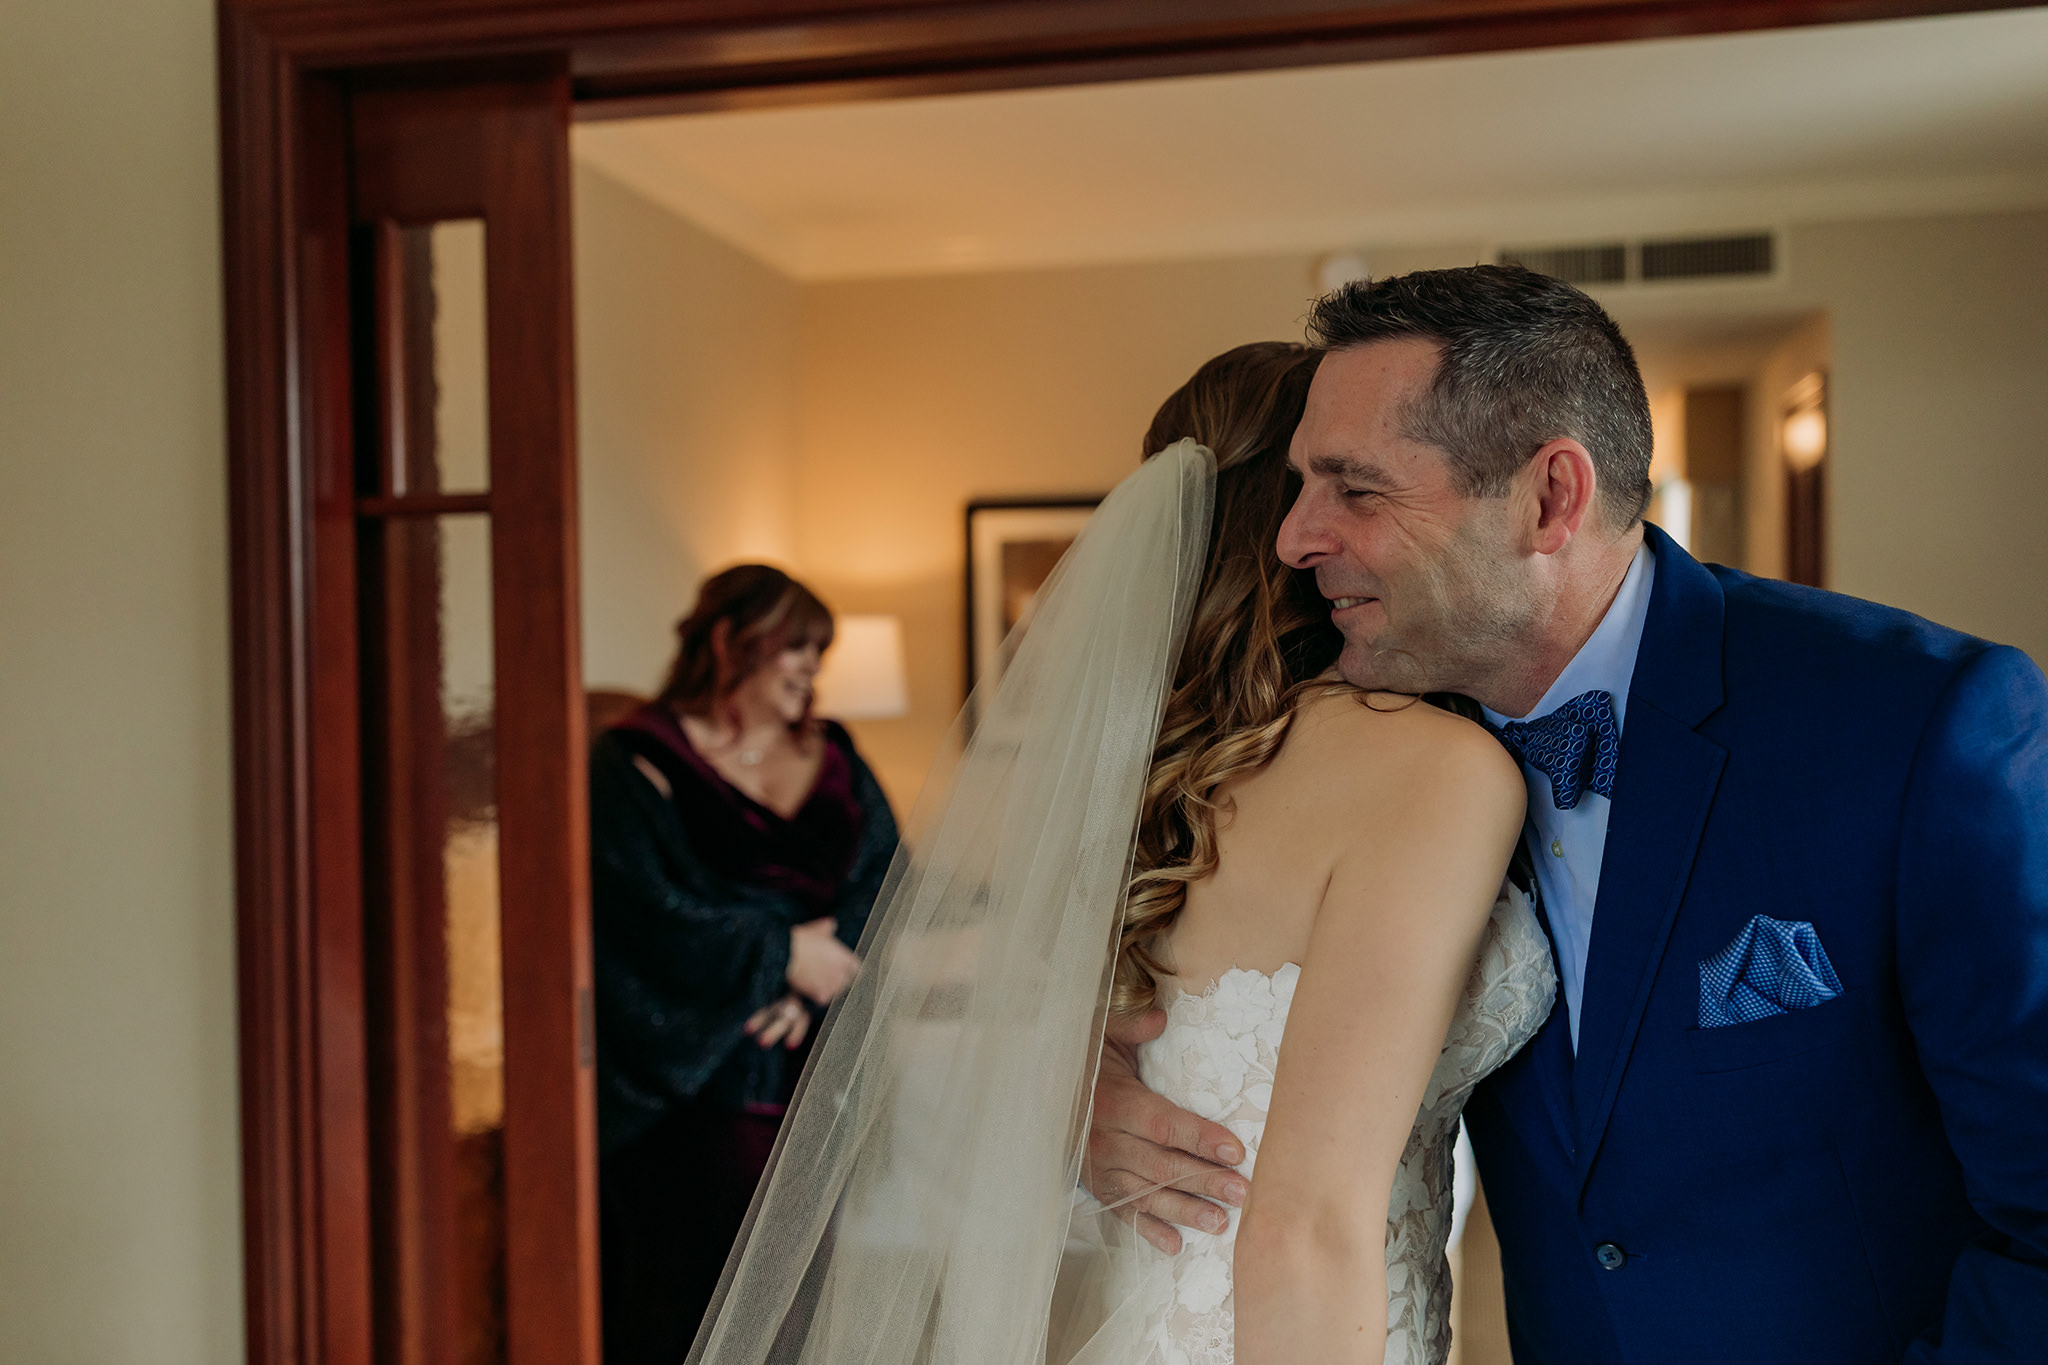 Bride getting ready for her outdoor winter wedding in a suite at the Fairmont Chateau Lake Louise in the Canadian Rocky Mountains first look with dad